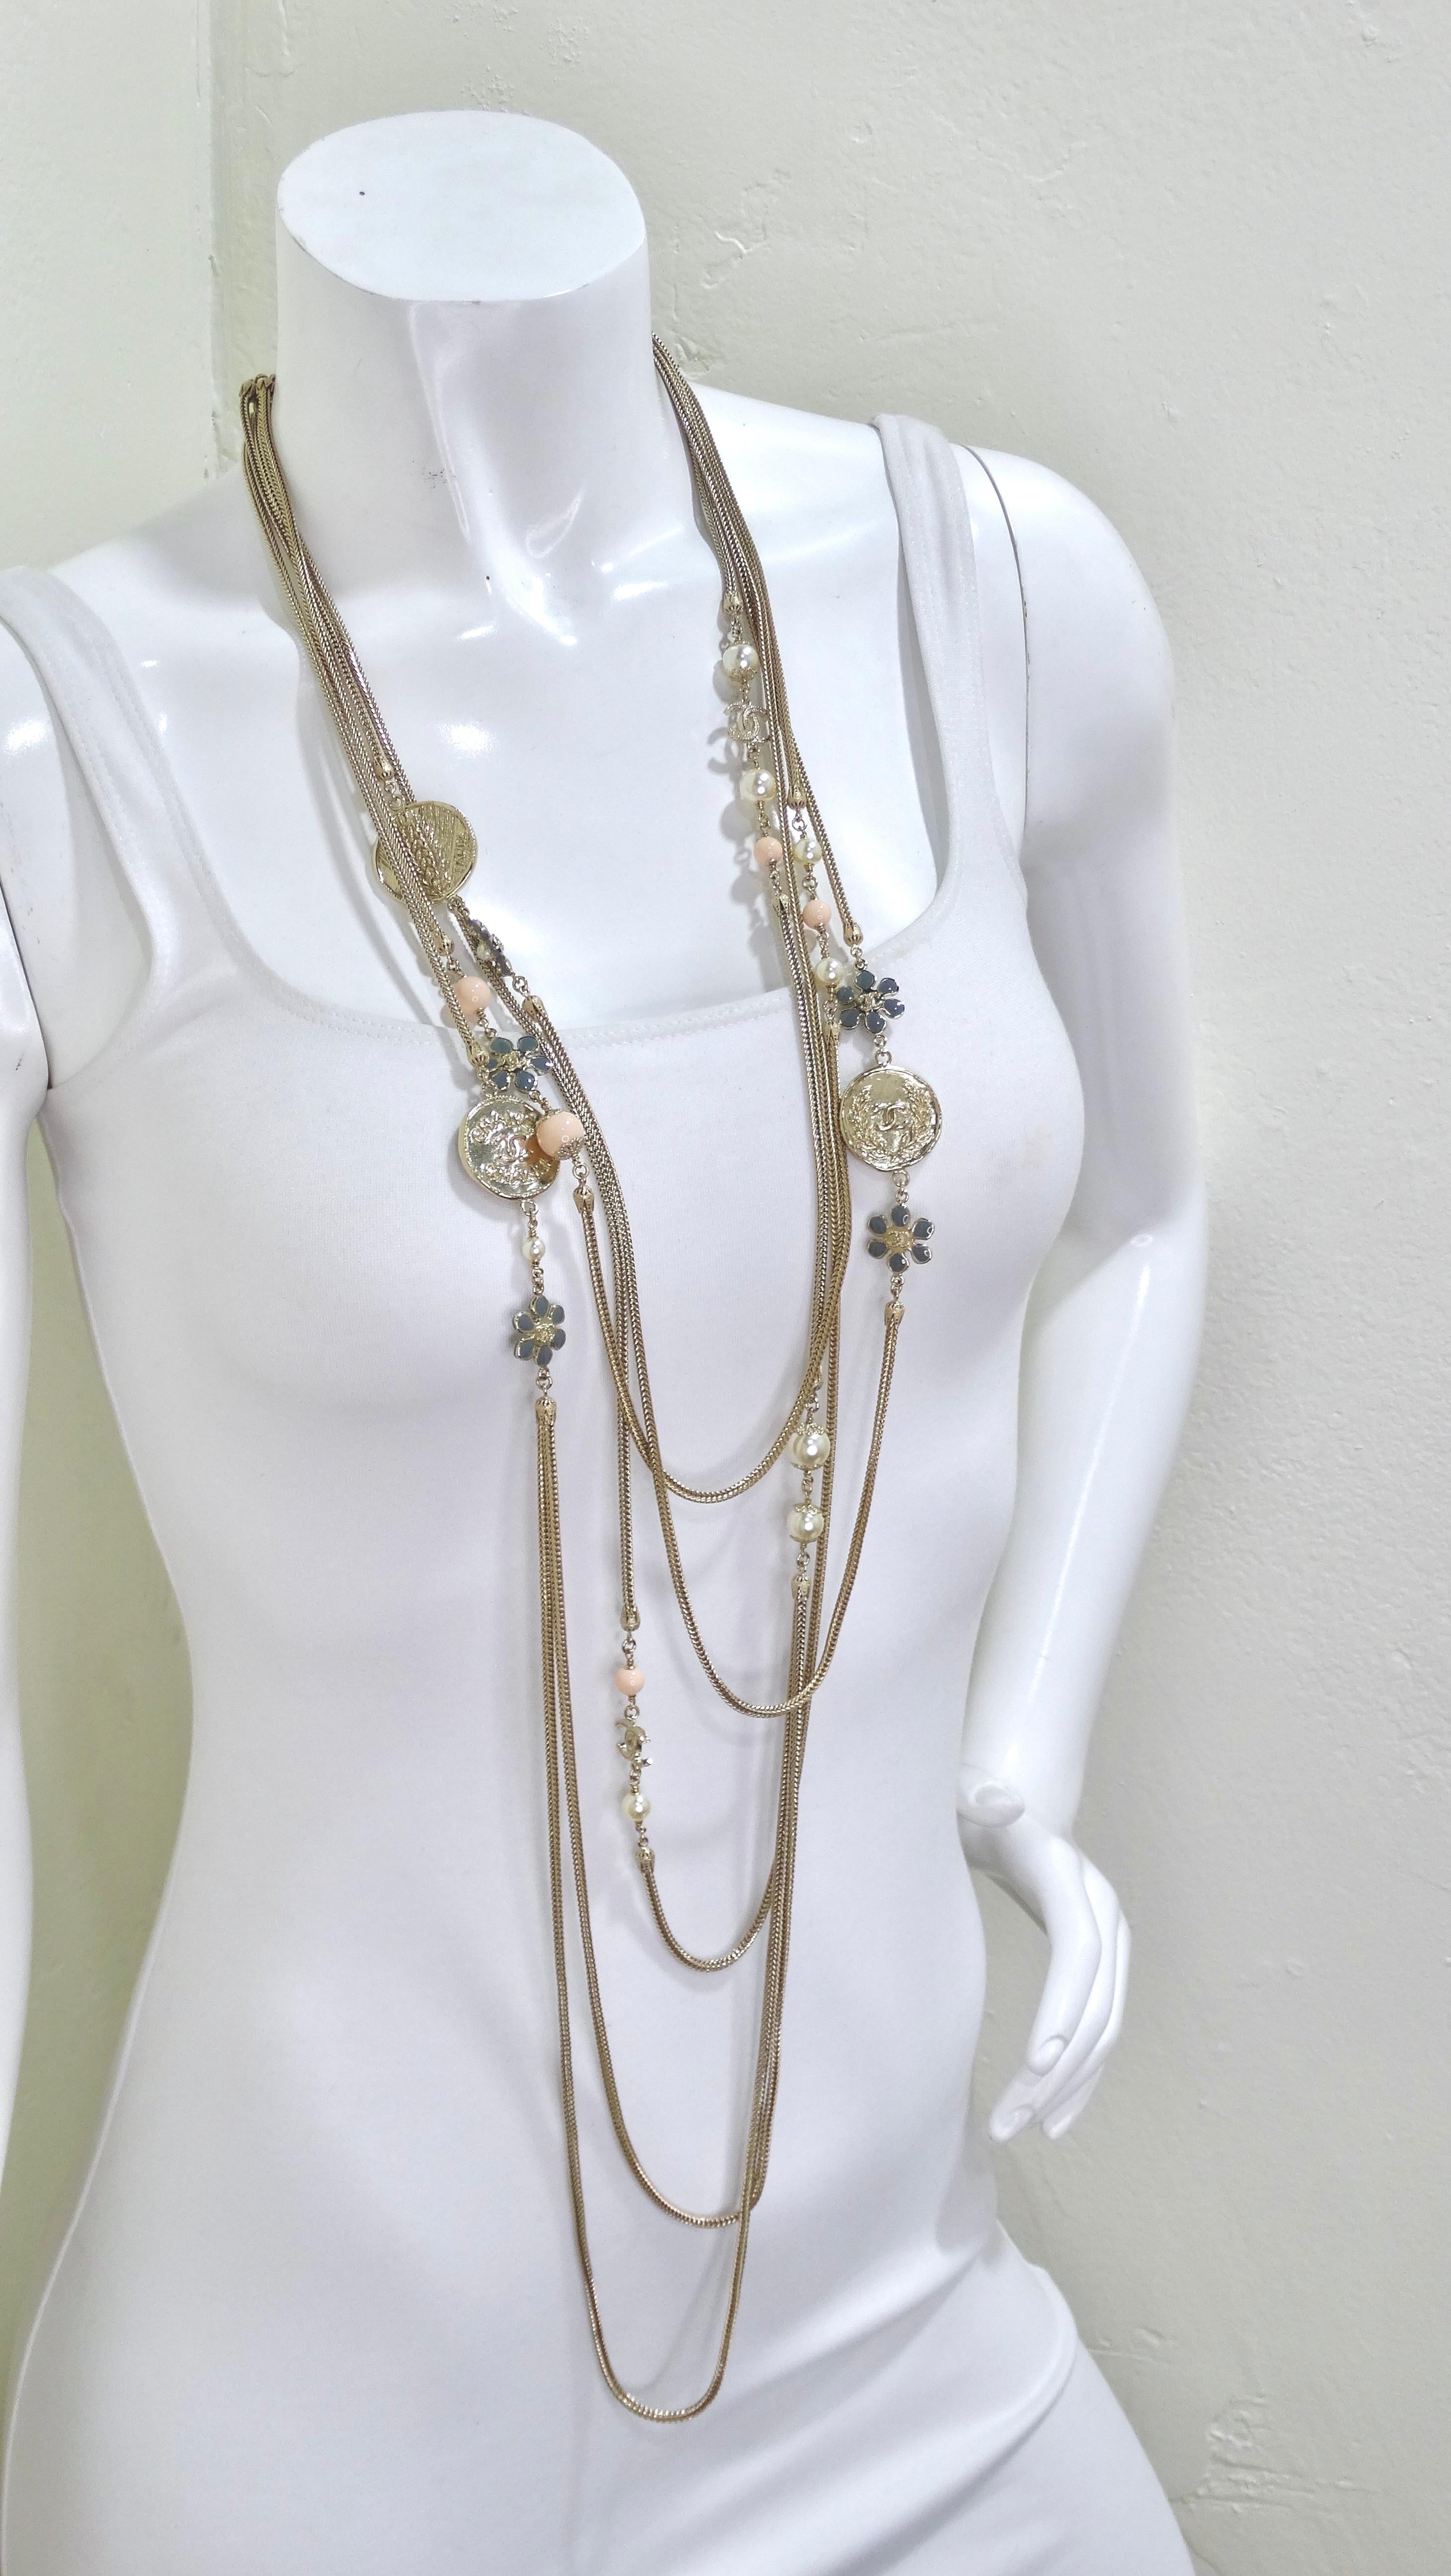 Chanel Statement Pendant Multi-Chain Necklace In Excellent Condition For Sale In Scottsdale, AZ